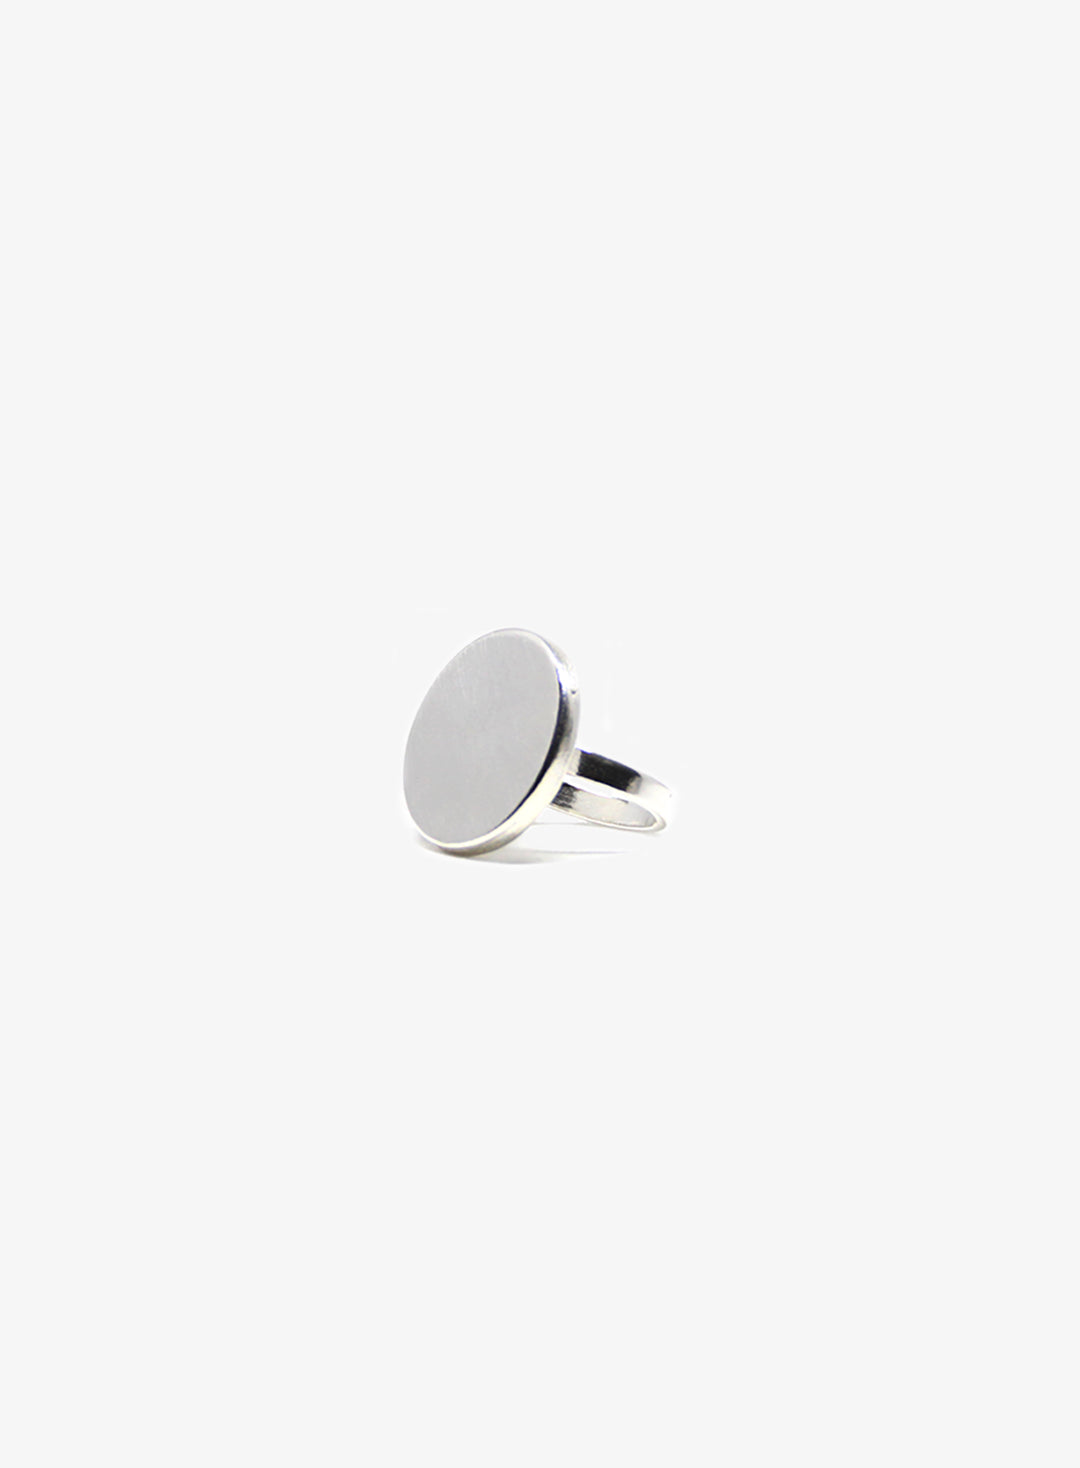 llayers-men-women-silver-rond-art-deco-ring-jewelry-solstice-handcrafted-in-Brooklyn-New-York-2